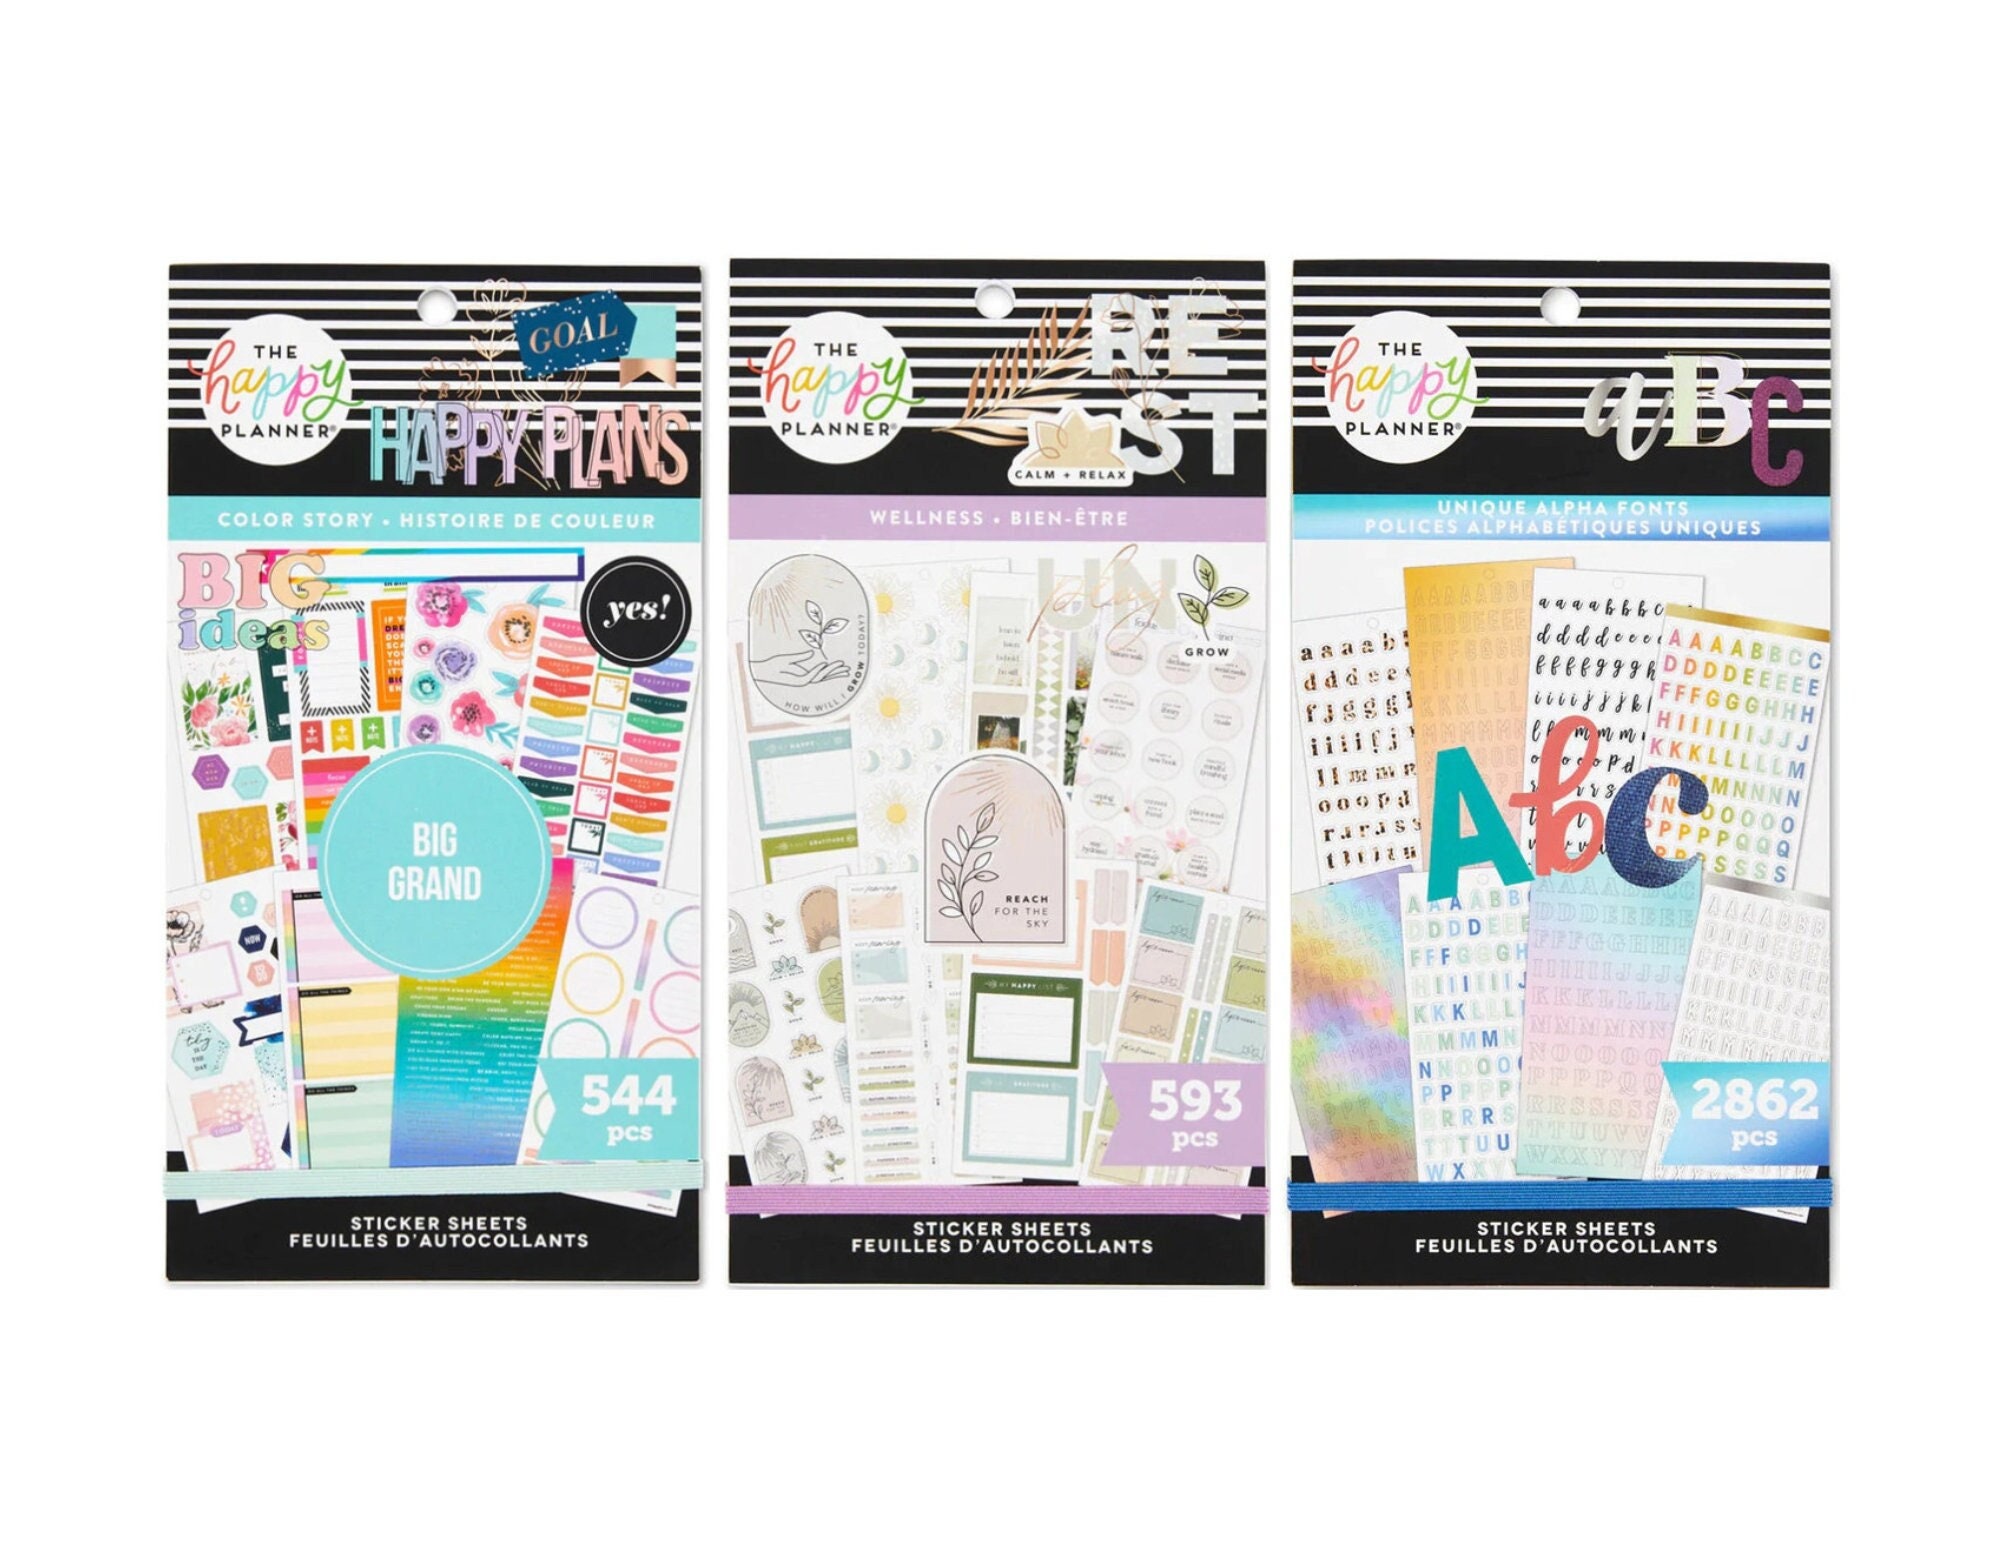 me & my BIG ideas mambiSTICKS Themed Stickers - The Happy Planner  Scrapbooking Supplies - Letters & Numbers - Multi-Color Stickers - Perfect  for